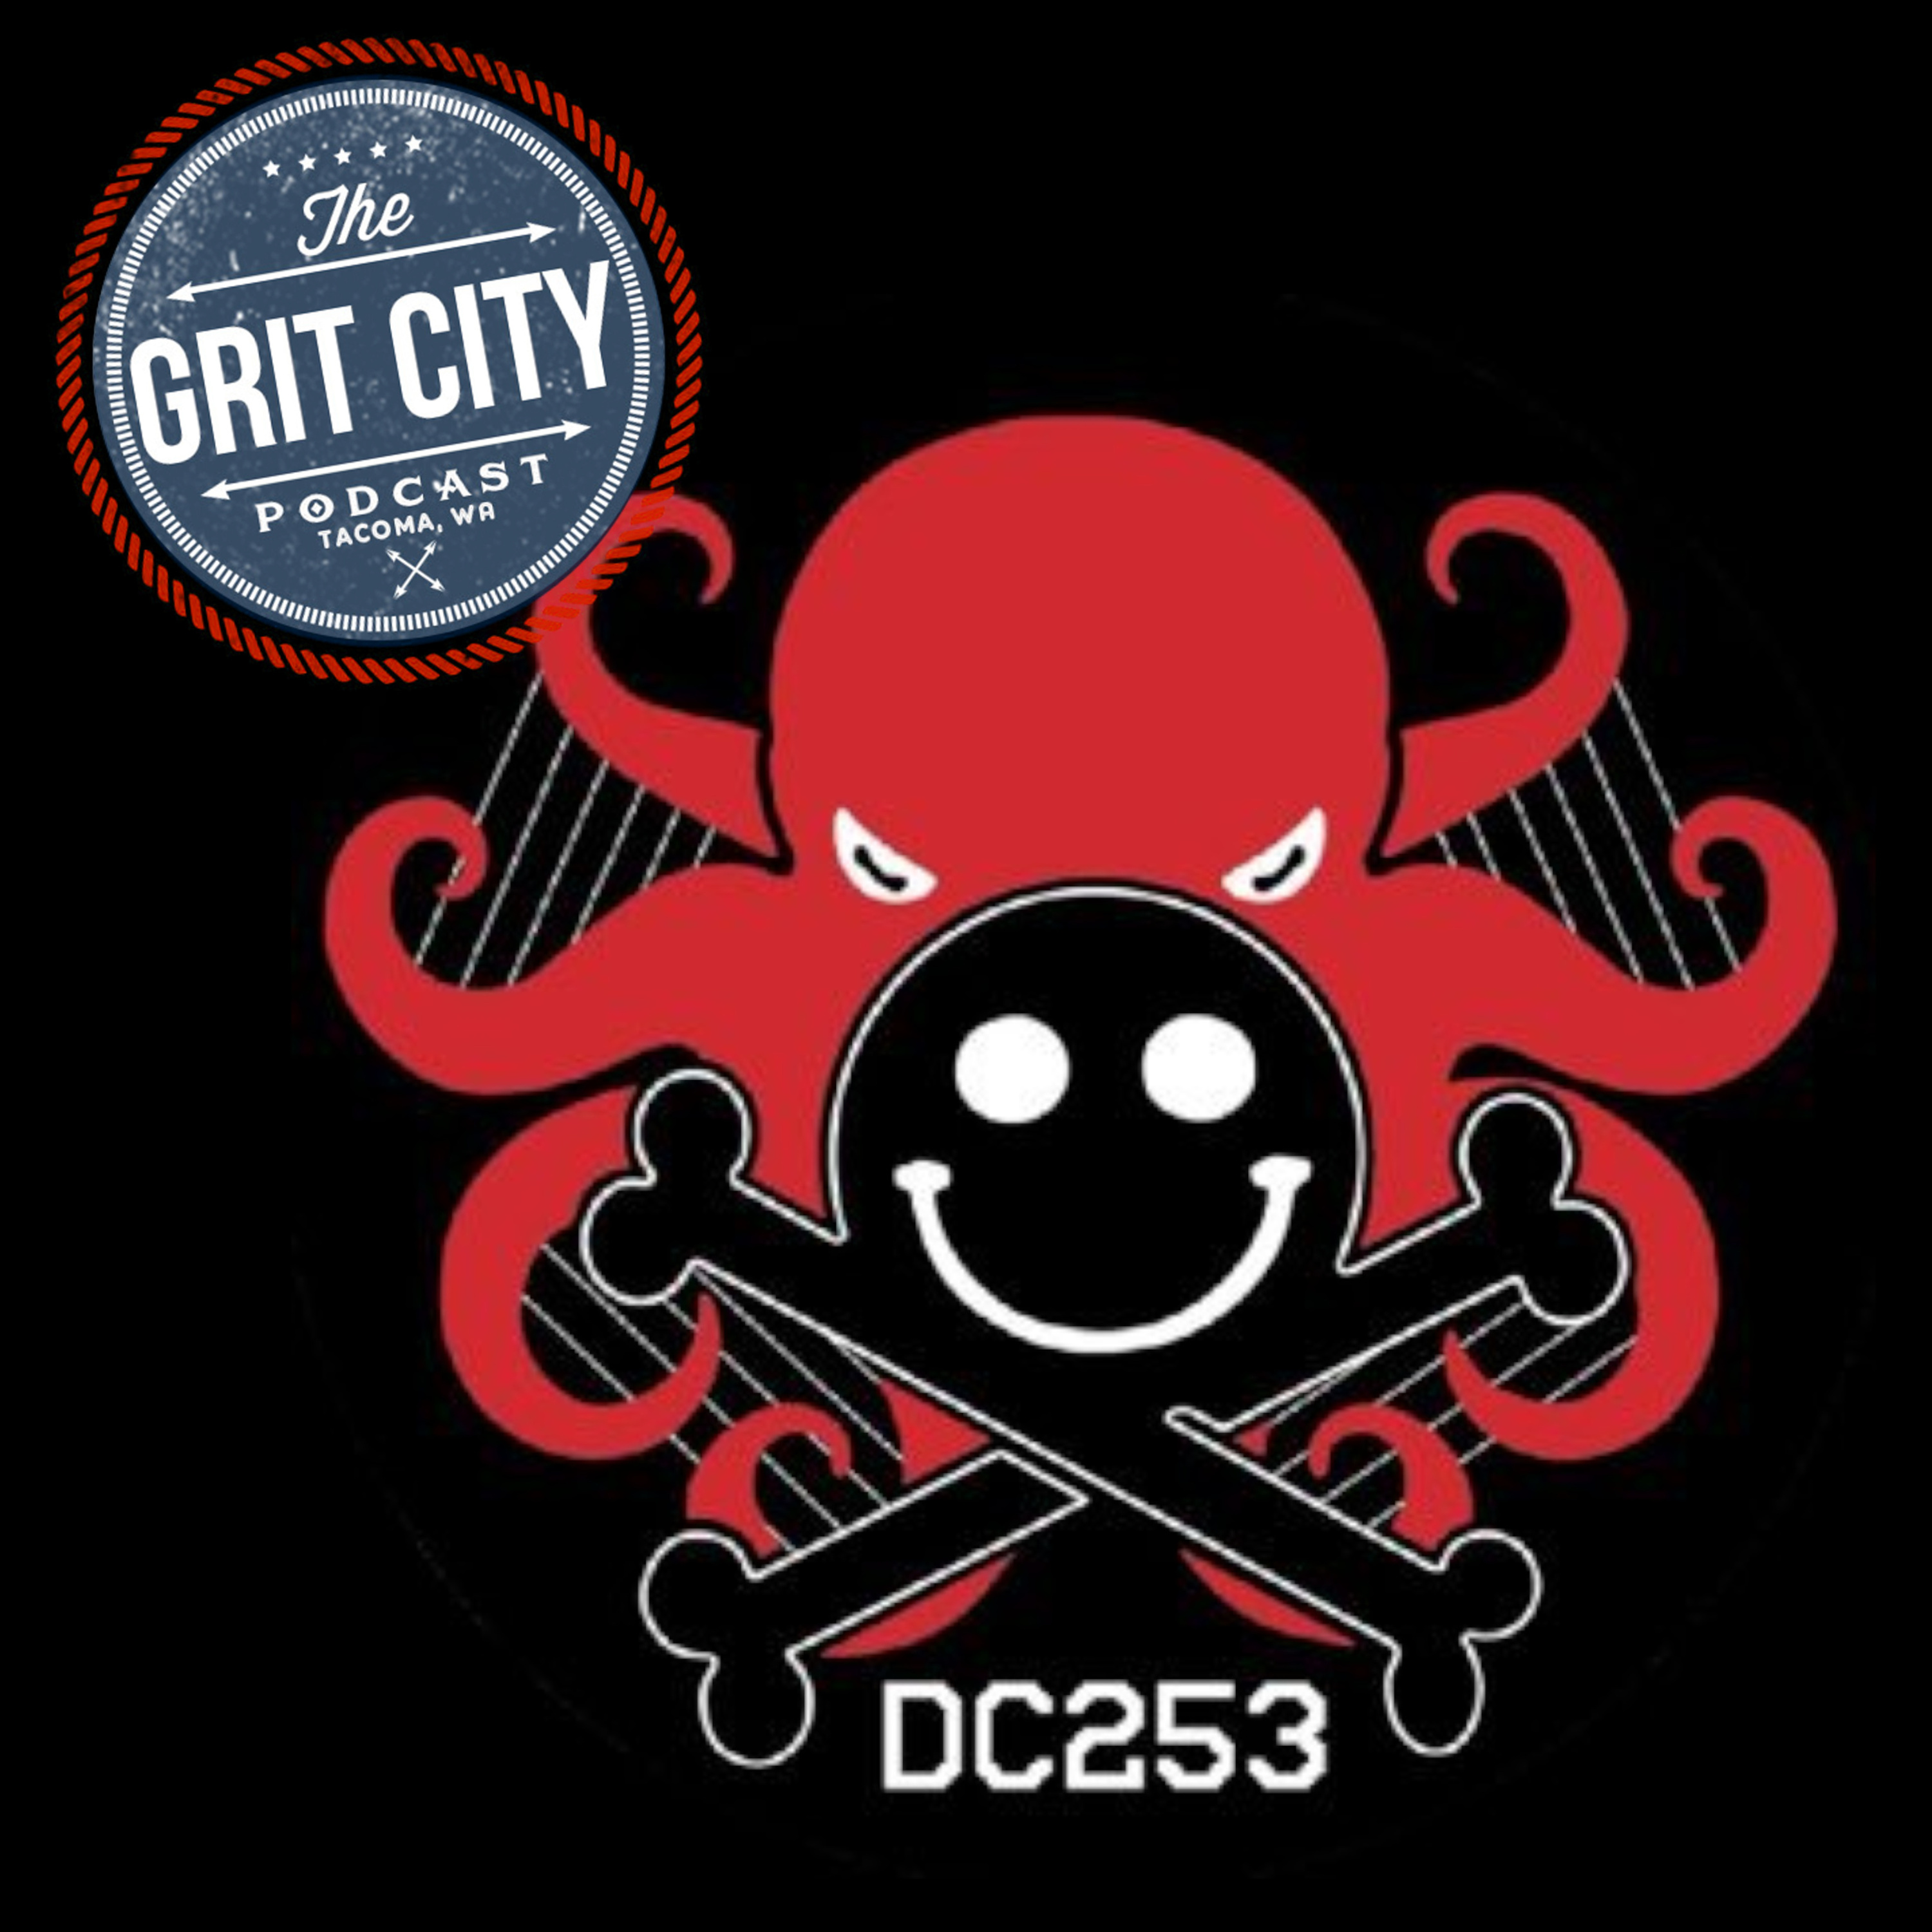 DC253 - Tacoma’s DEF CON Group